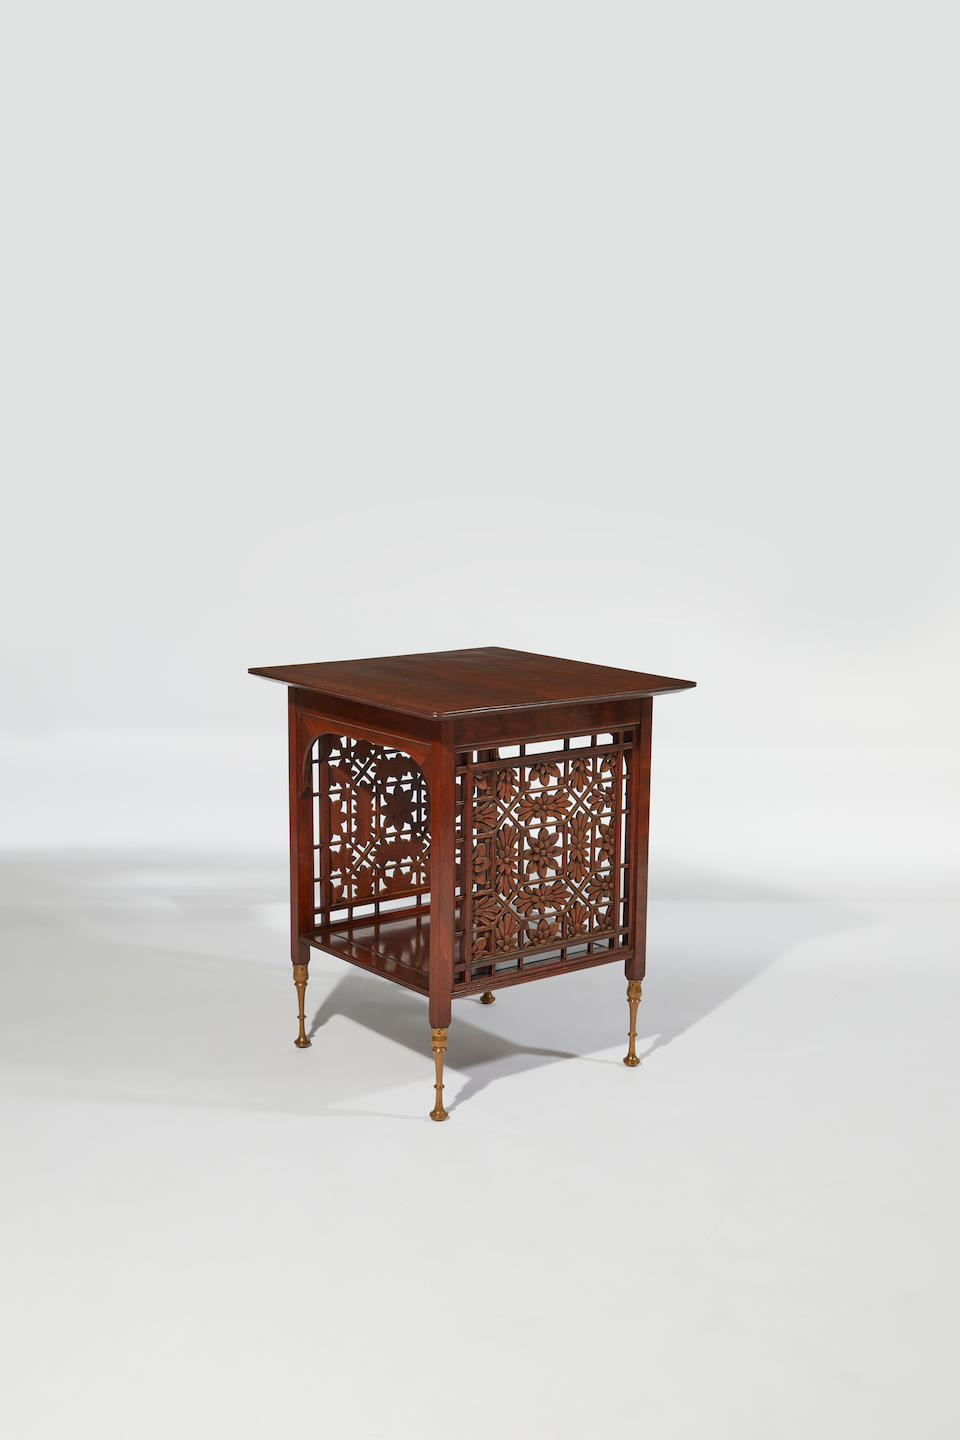 LOUIS C. Tiffany & Co., Associated Artists; Attributed to  Rare Side Table, circa 1880incorporating Lockwood de Forest panels, fustic, teak, brassheight 26in (66cm); width 21&#188;in (54cm); depth 21&#188; in (54cm)